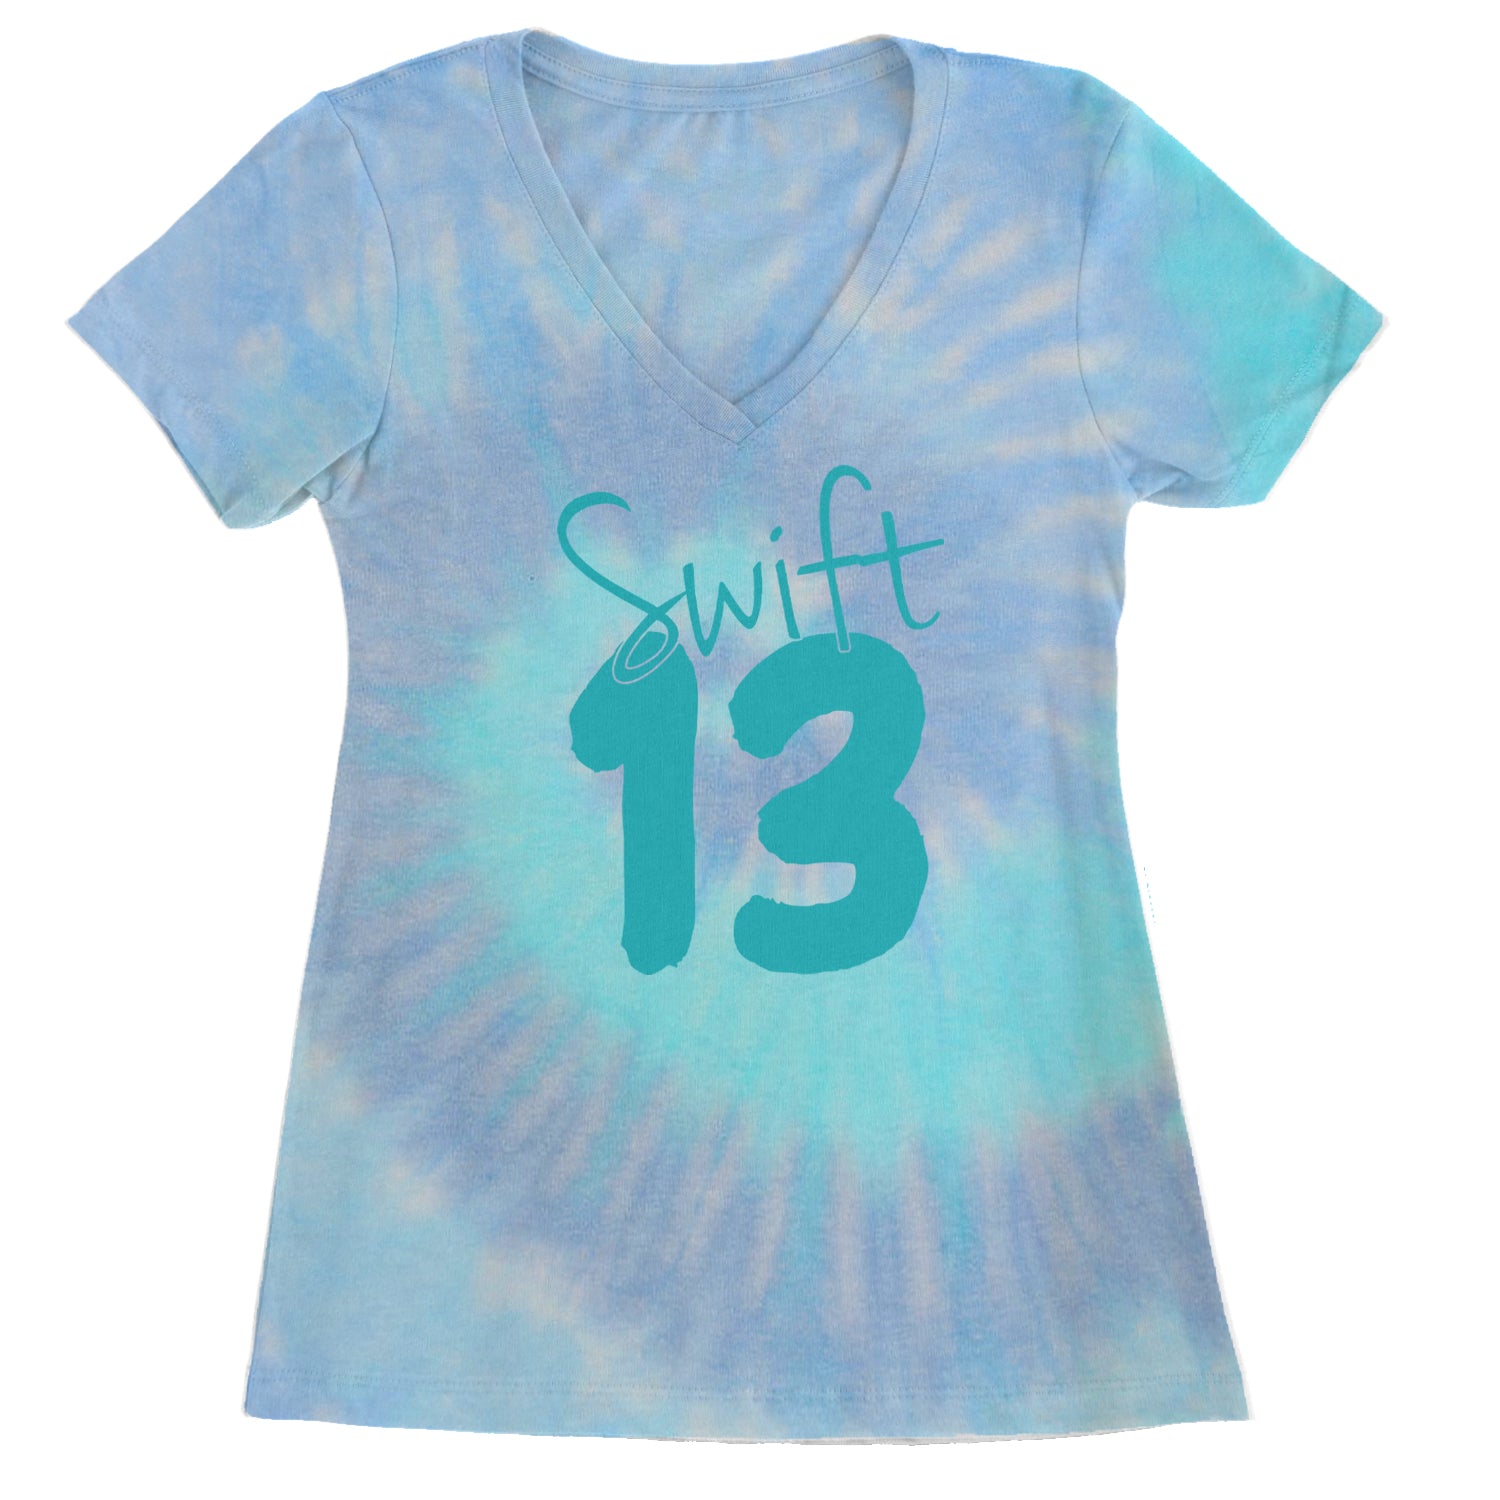 13 Swift 13 Lucky Number Era TTPD Ladies V-Neck T-shirt Blue Clouds